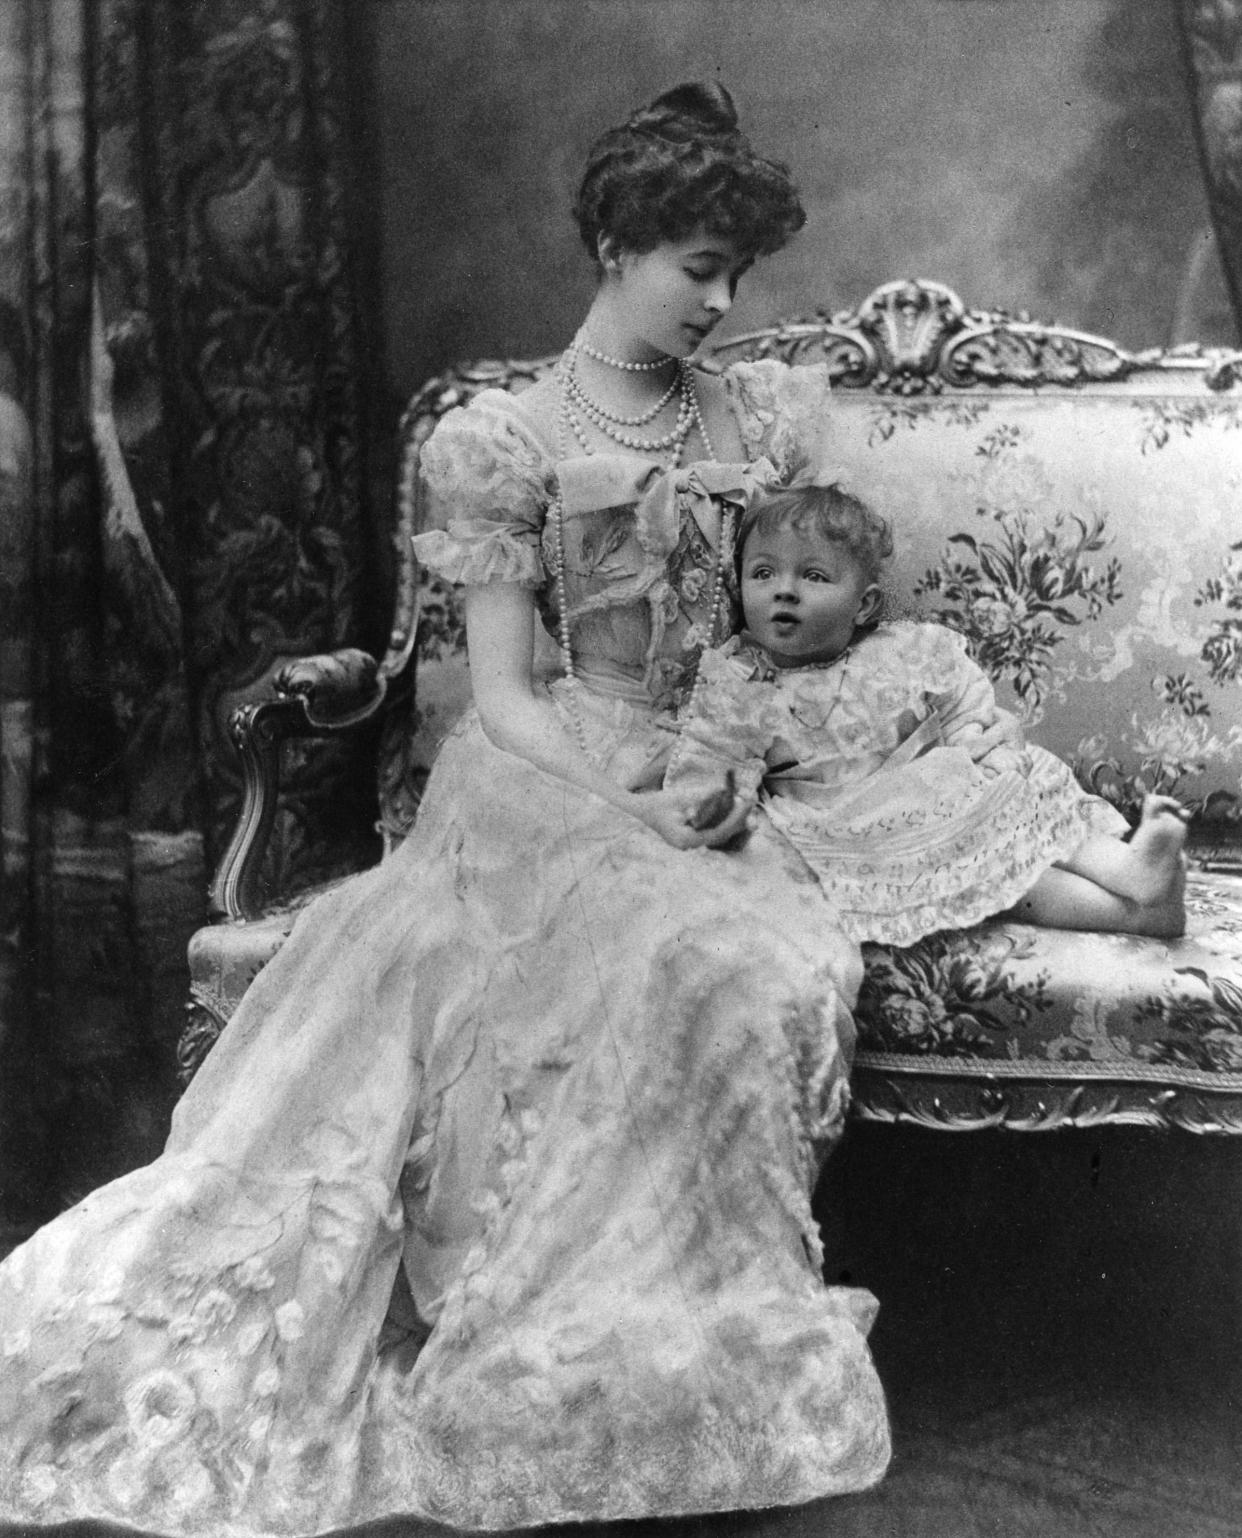 Consuelo Vanderbilt, who married the 9th Duke of Marlborough in 1895, with her son, The Marquess of Blandford, in 1899. She later married Jacques Balsan and moved to Palm Beach.